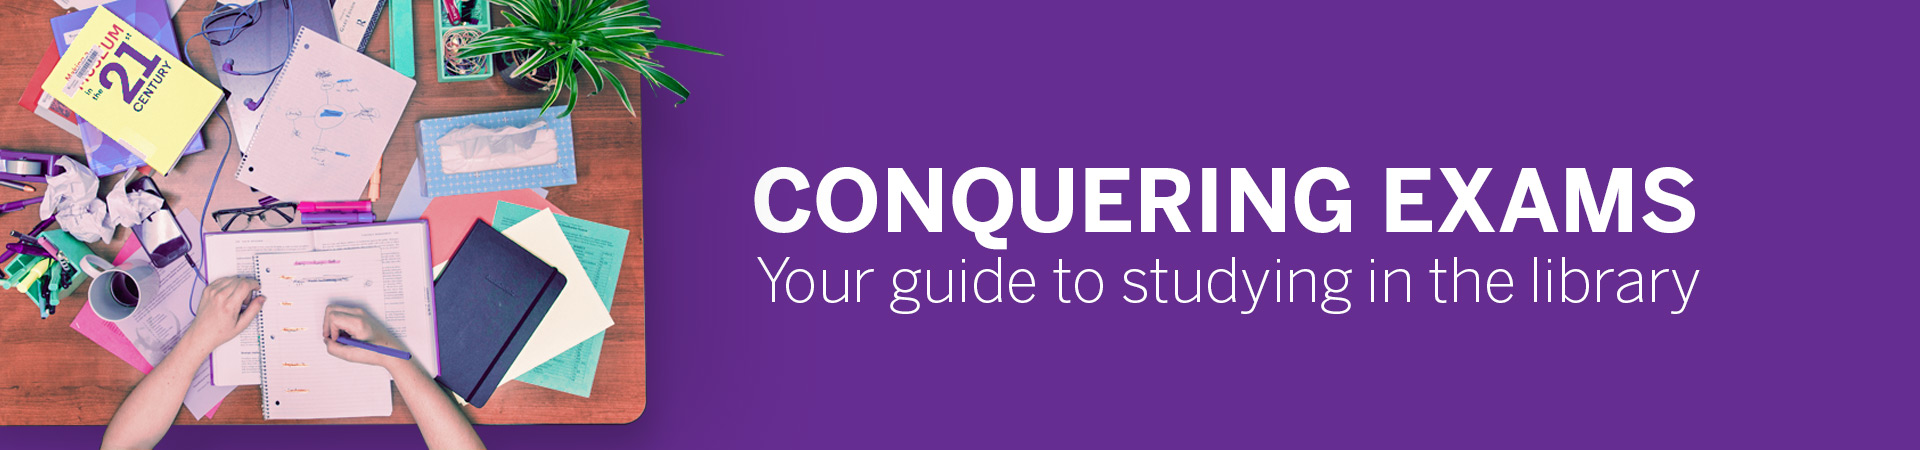 Conquering Exams: Your guide to studying in the library